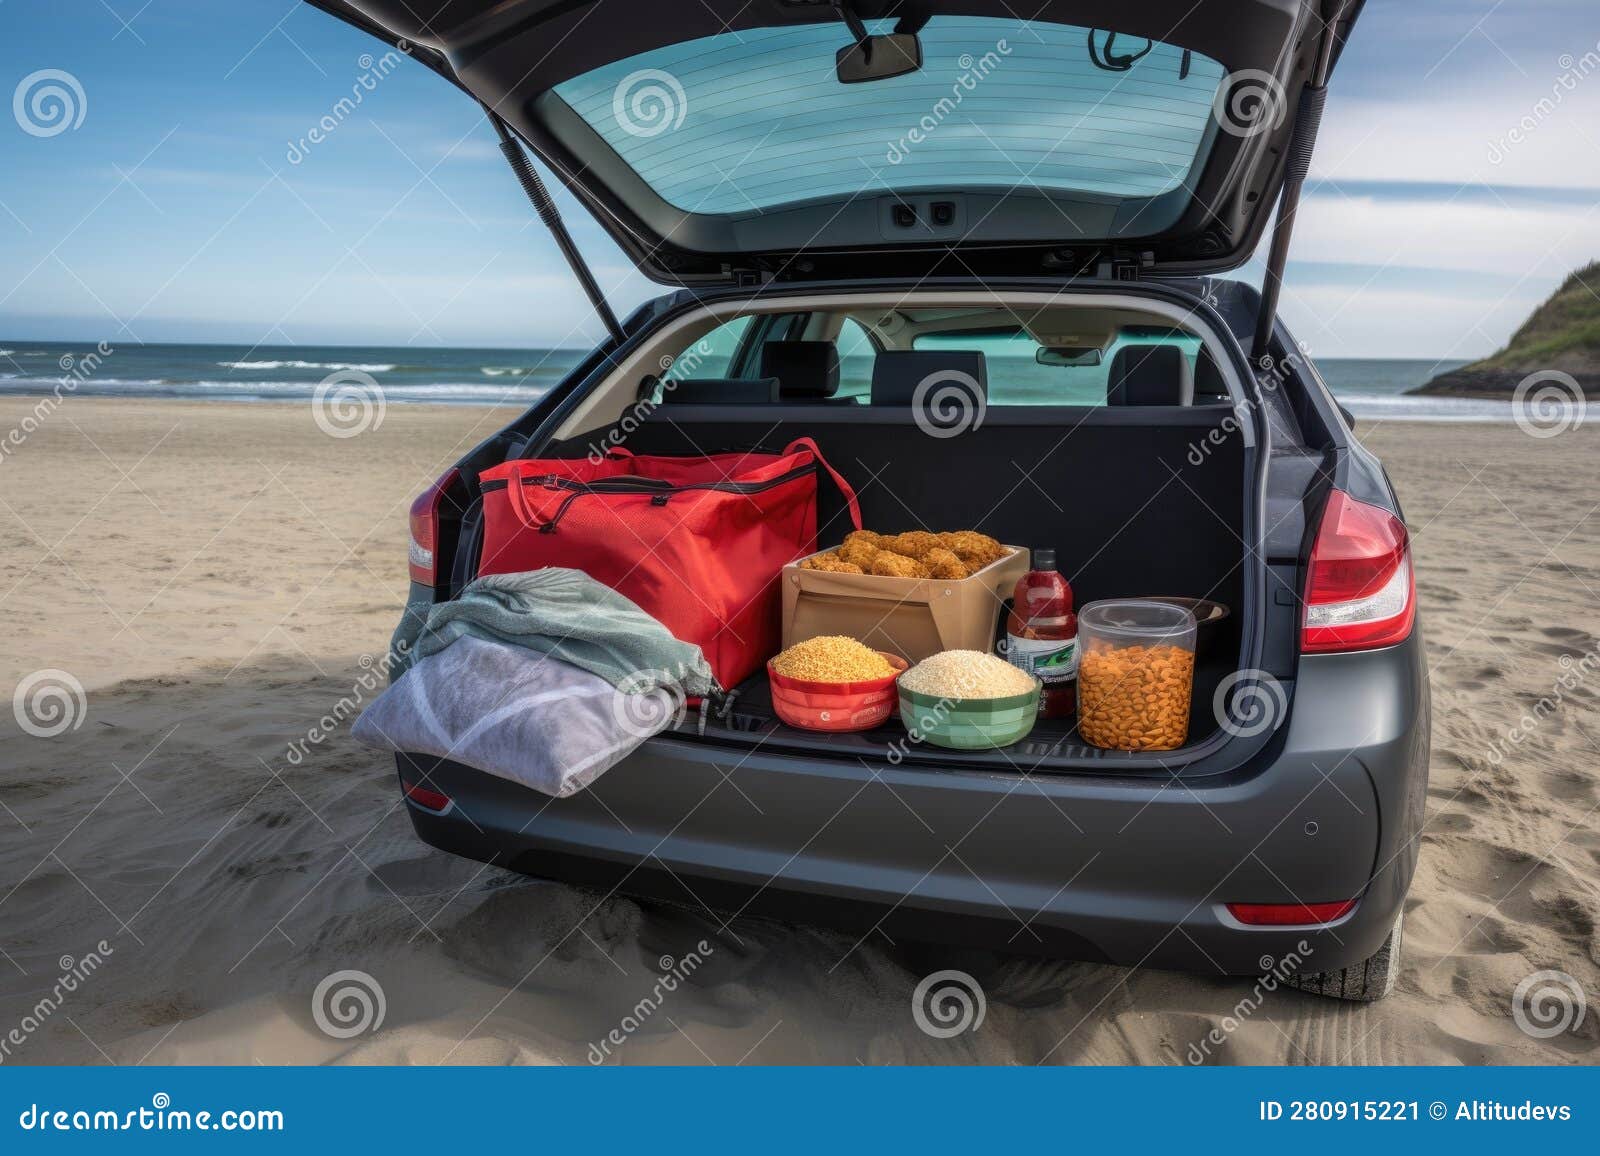 Beach Road Trip with Convertible and Bag of Snacks Stock Image - Image ...